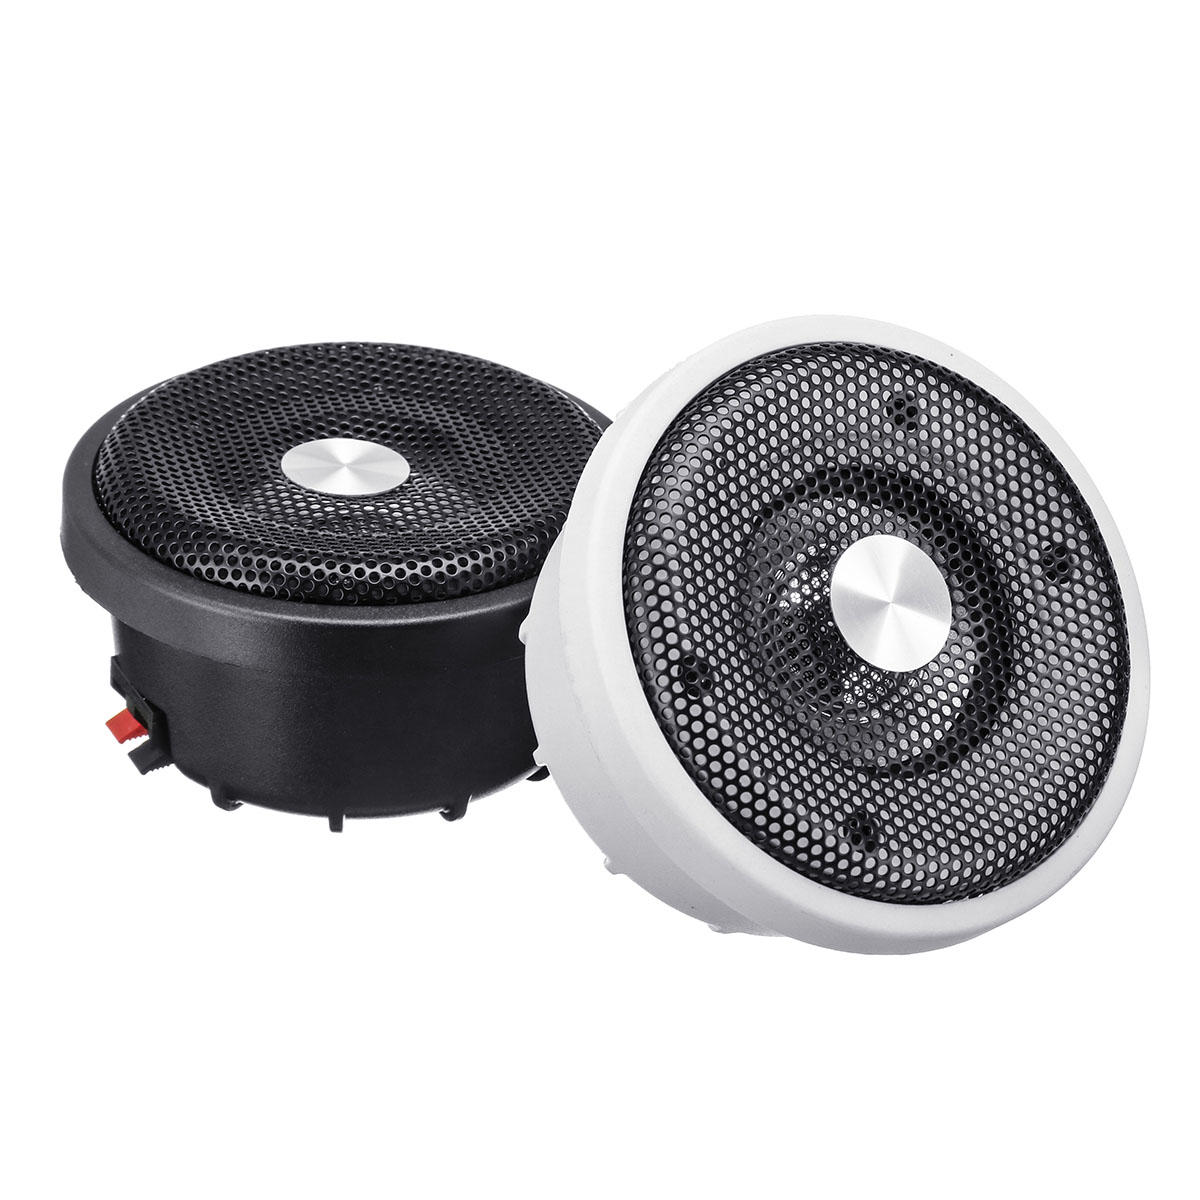 WEAH-330 Ceiling Wall Mount Speaker Stereo Sound Ceiling Home In-wall Flush Boat Speakers